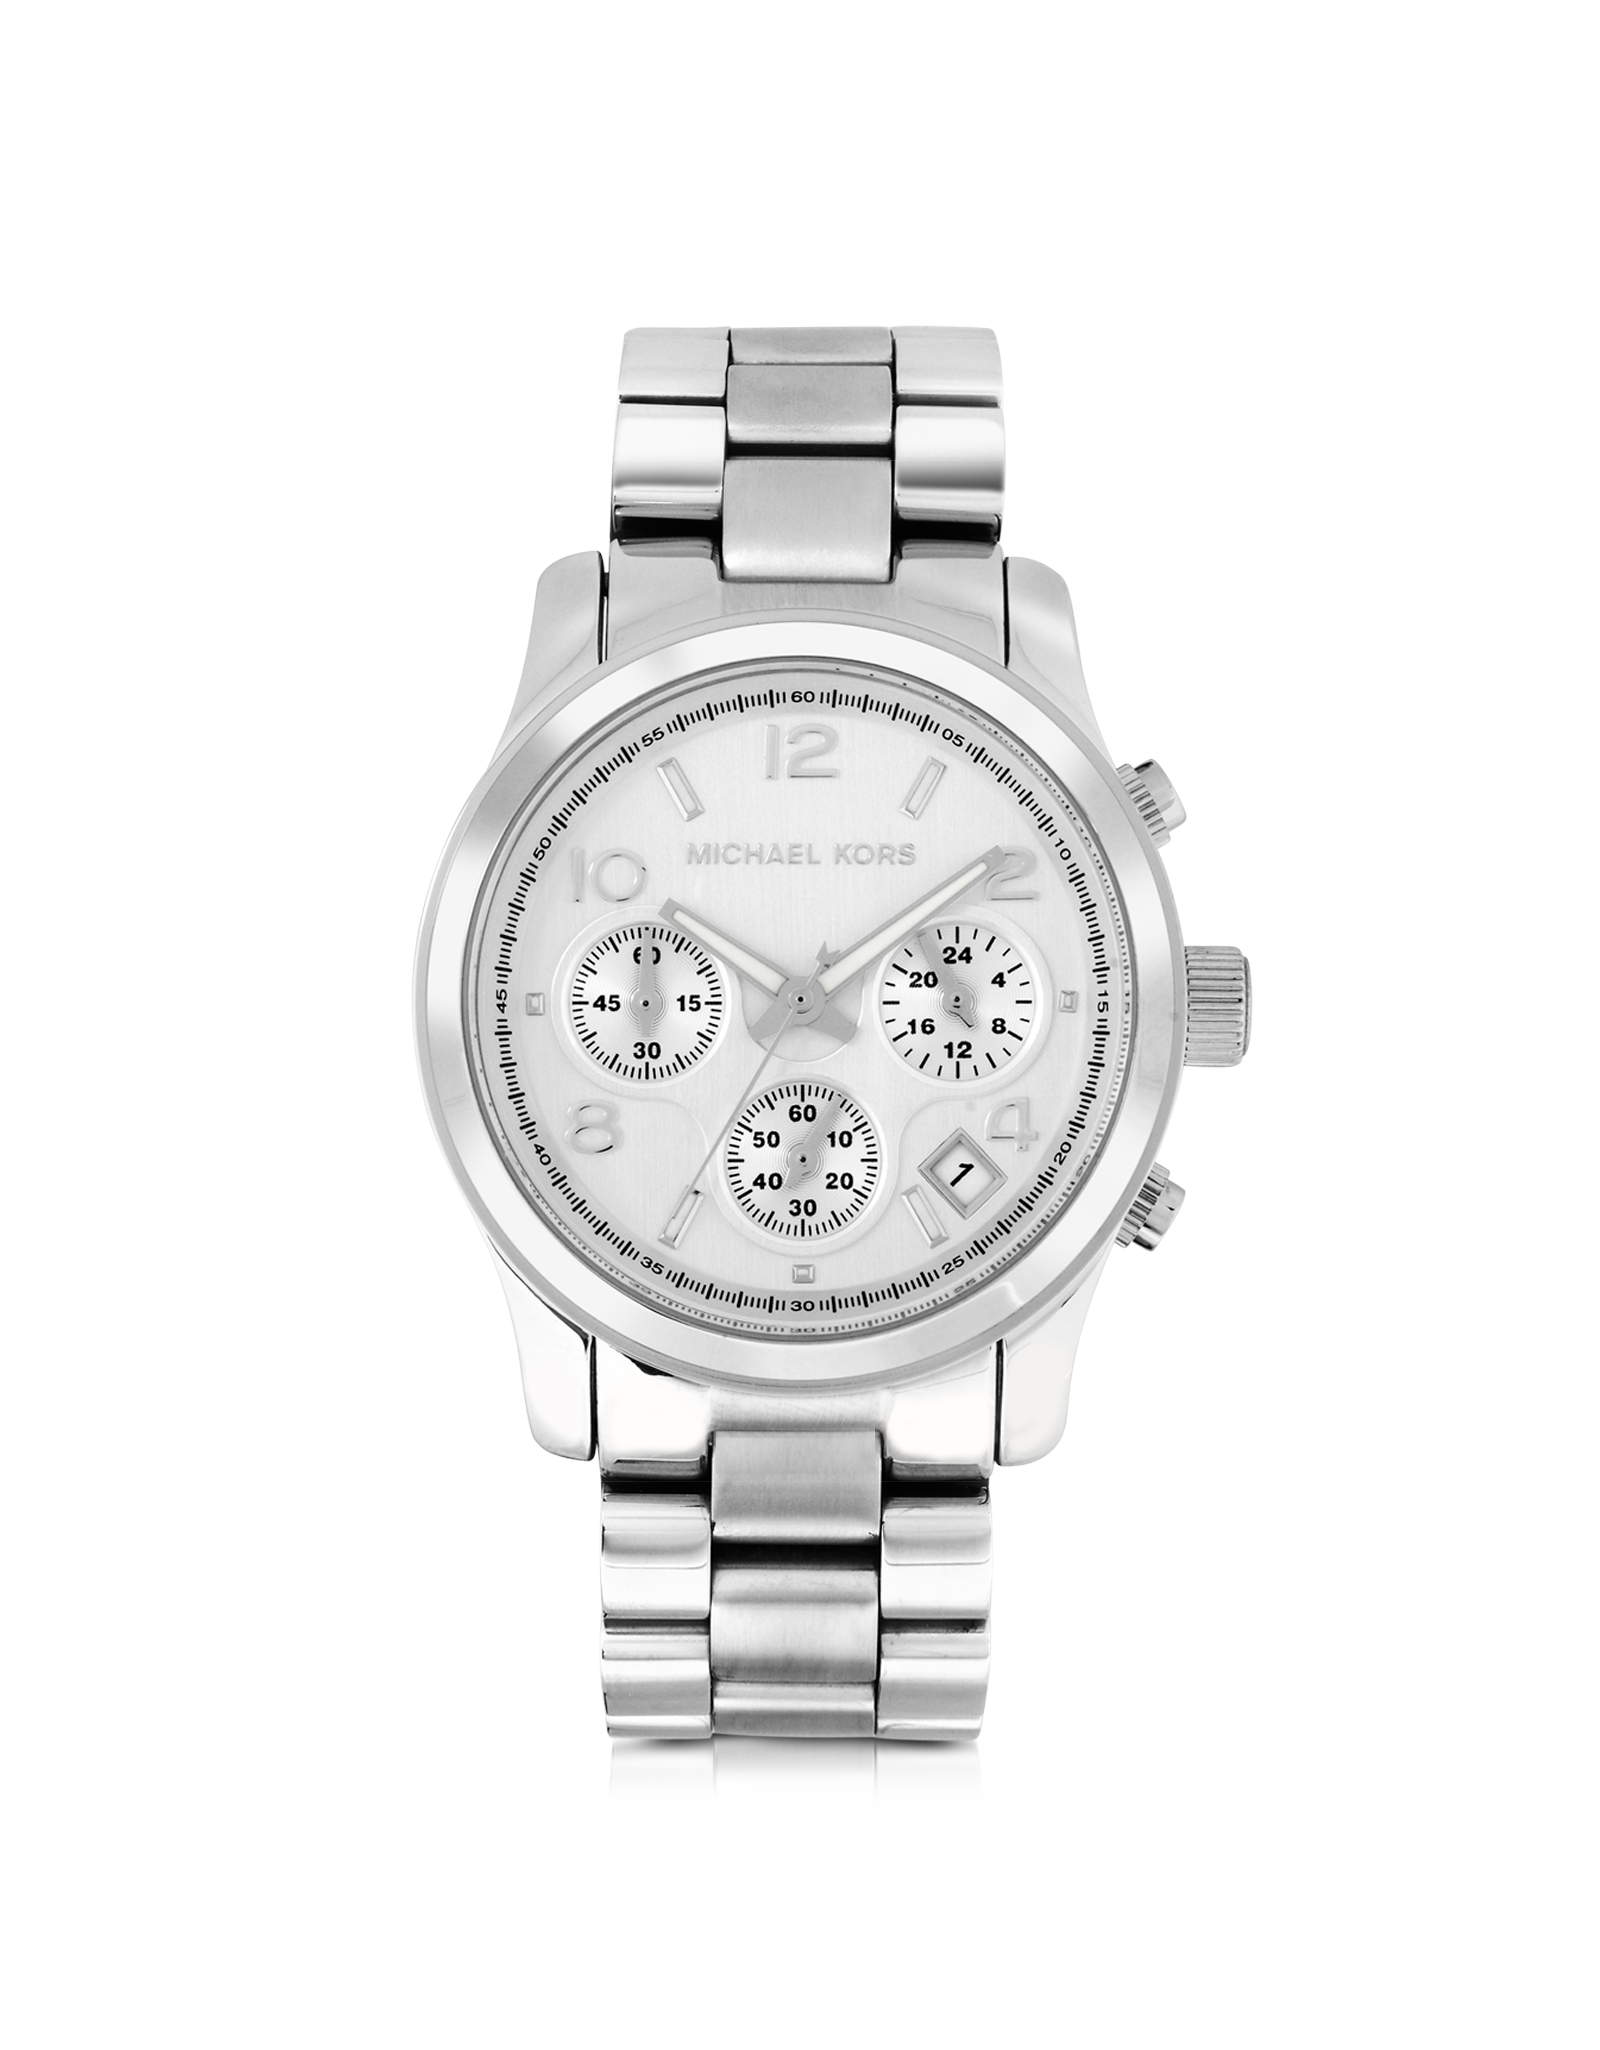 Michael kors Runway Stainless Steel Women'S Chronograph Watch in Gray | Lyst